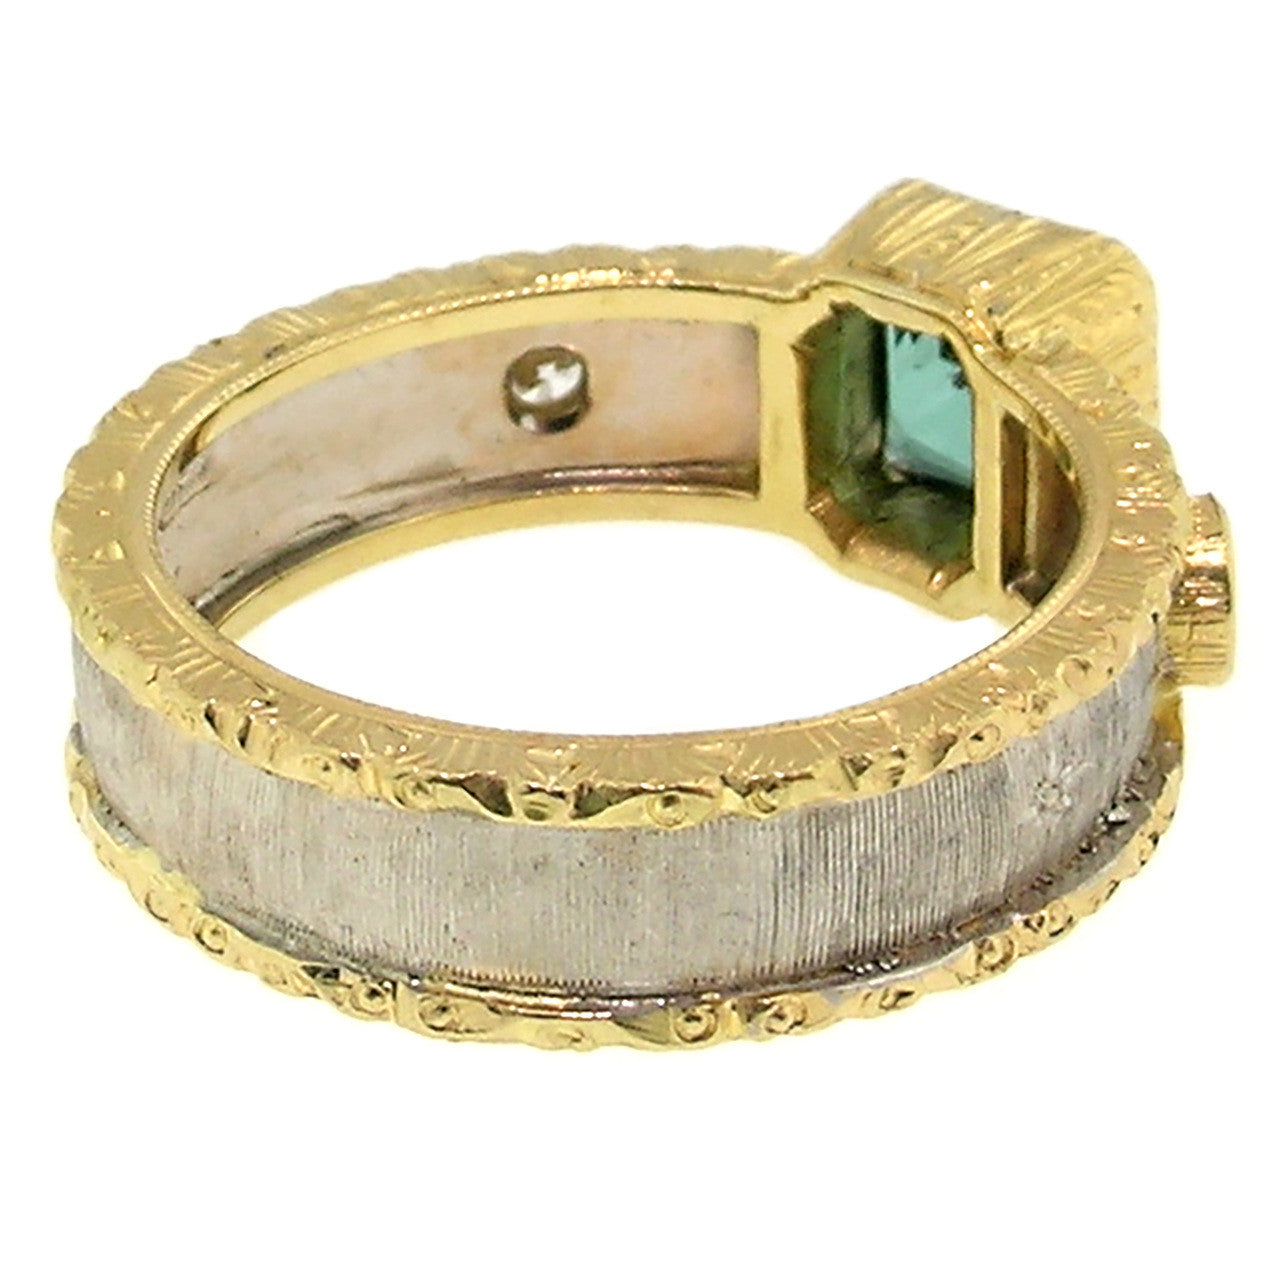 Blue Green Tourmaline 18kt Sienna Ring made in Florence Italy by Cynthia Scott Jewelry